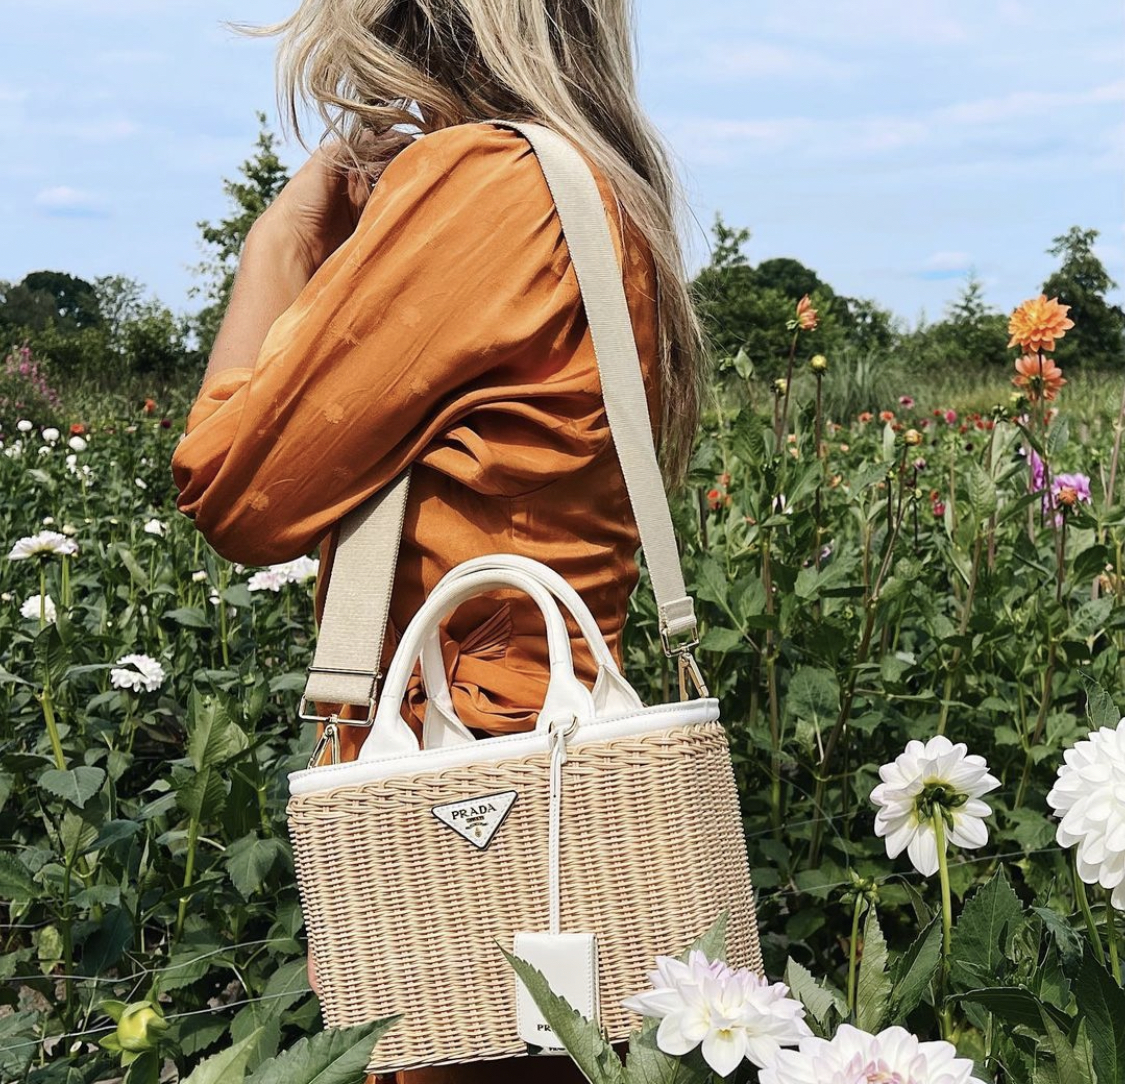 CELINE HAUL PART 2. My summer basket bag🧺🤎is a must have this